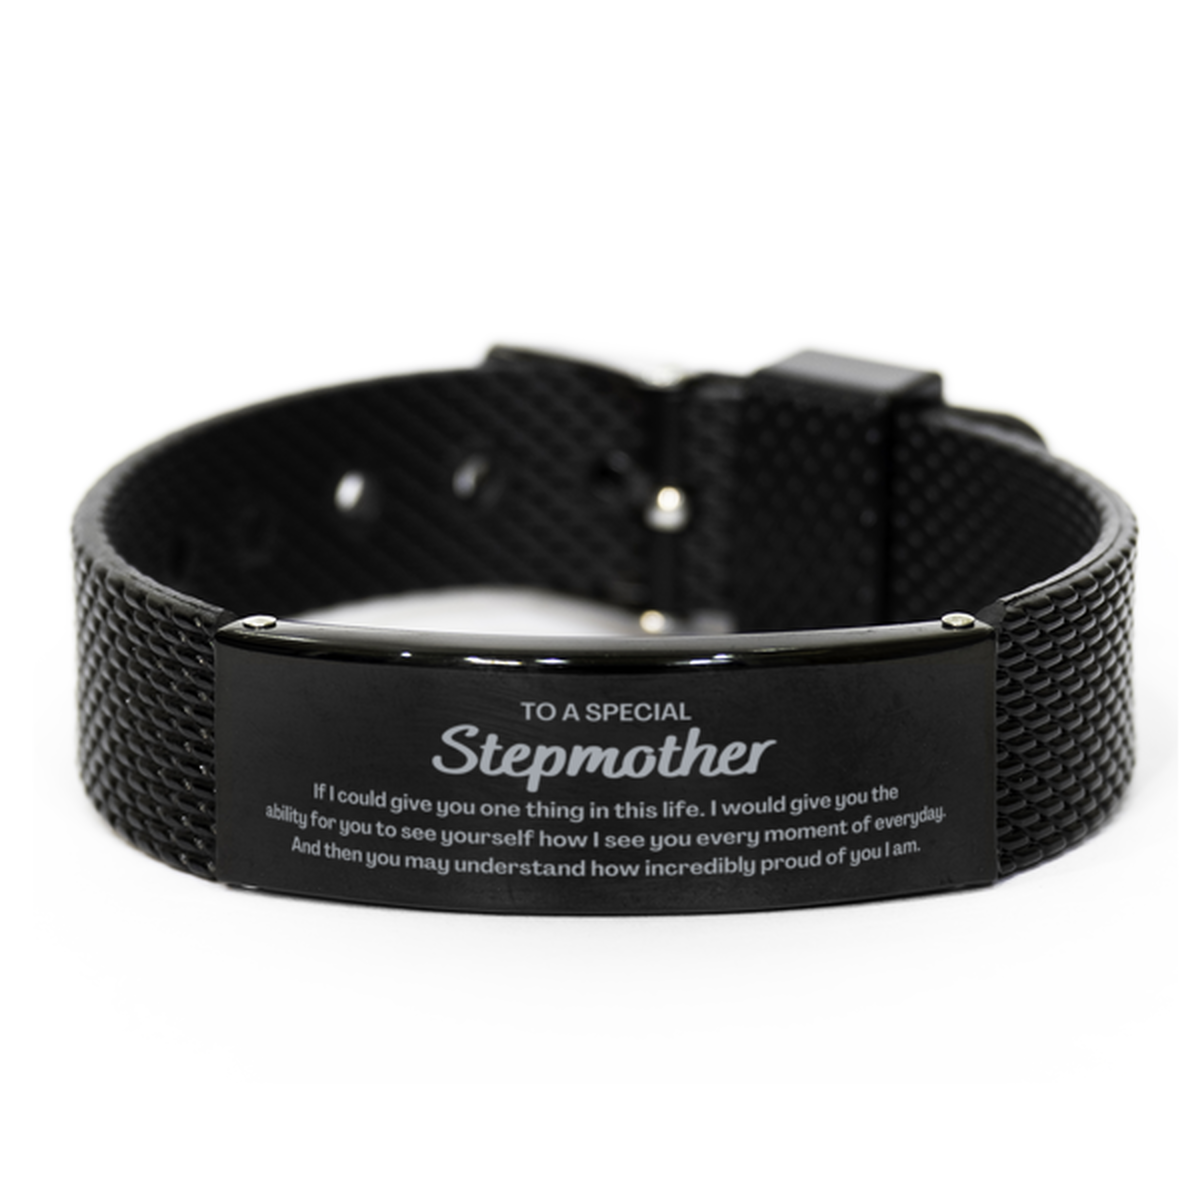 To My Stepmother Black Shark Mesh Bracelet, Gifts For Stepmother Engraved, Inspirational Gifts for Christmas Birthday, Epic Gifts for Stepmother To A Special Stepmother how incredibly proud of you I am